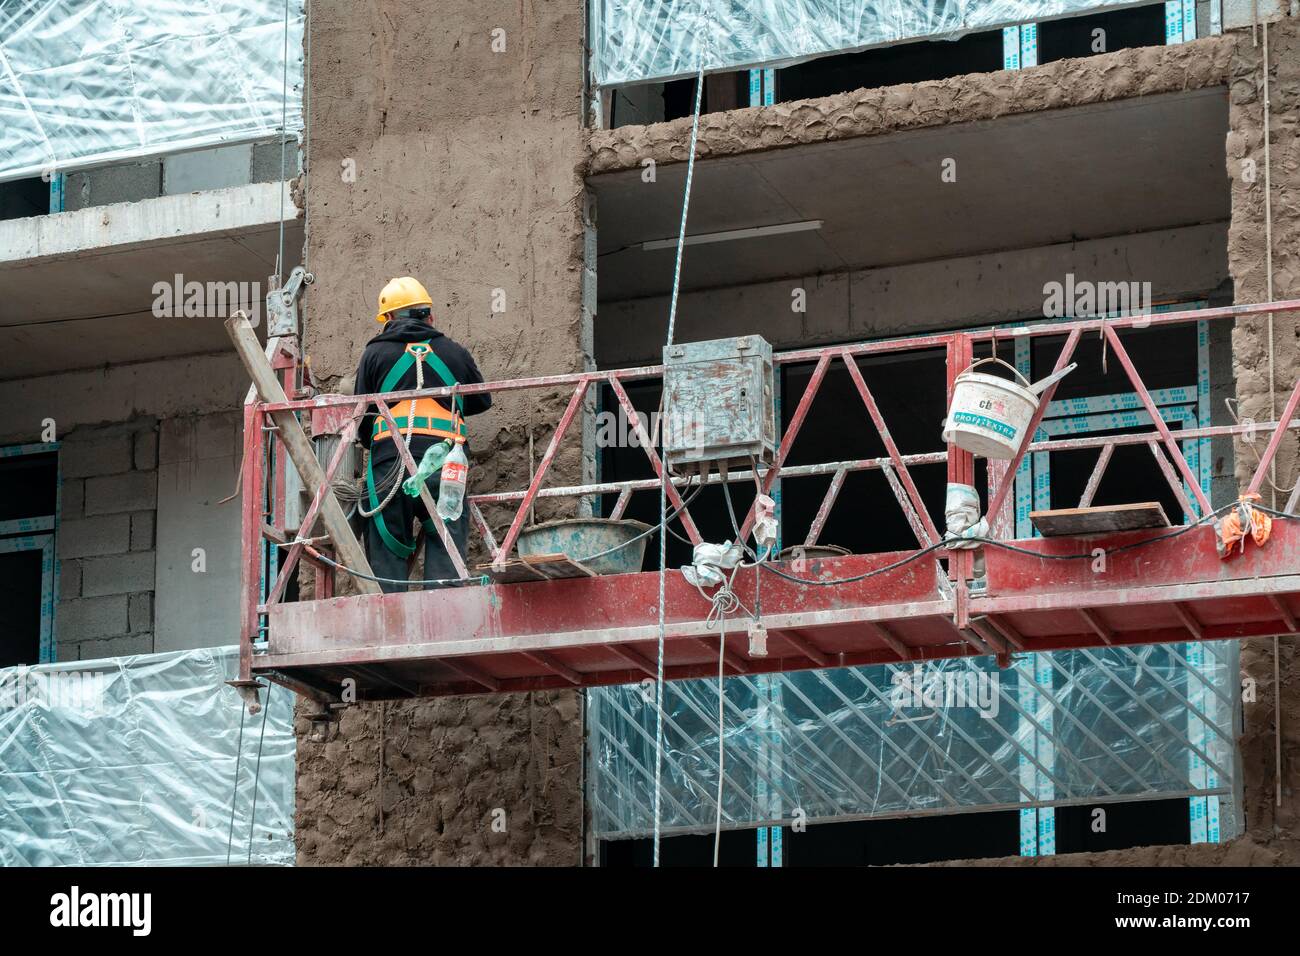 Tbilisi, Georgia - 12 December, 2020: worker working at construction. Building structure on progress at site. Wearing proper safety gear Stock Photo